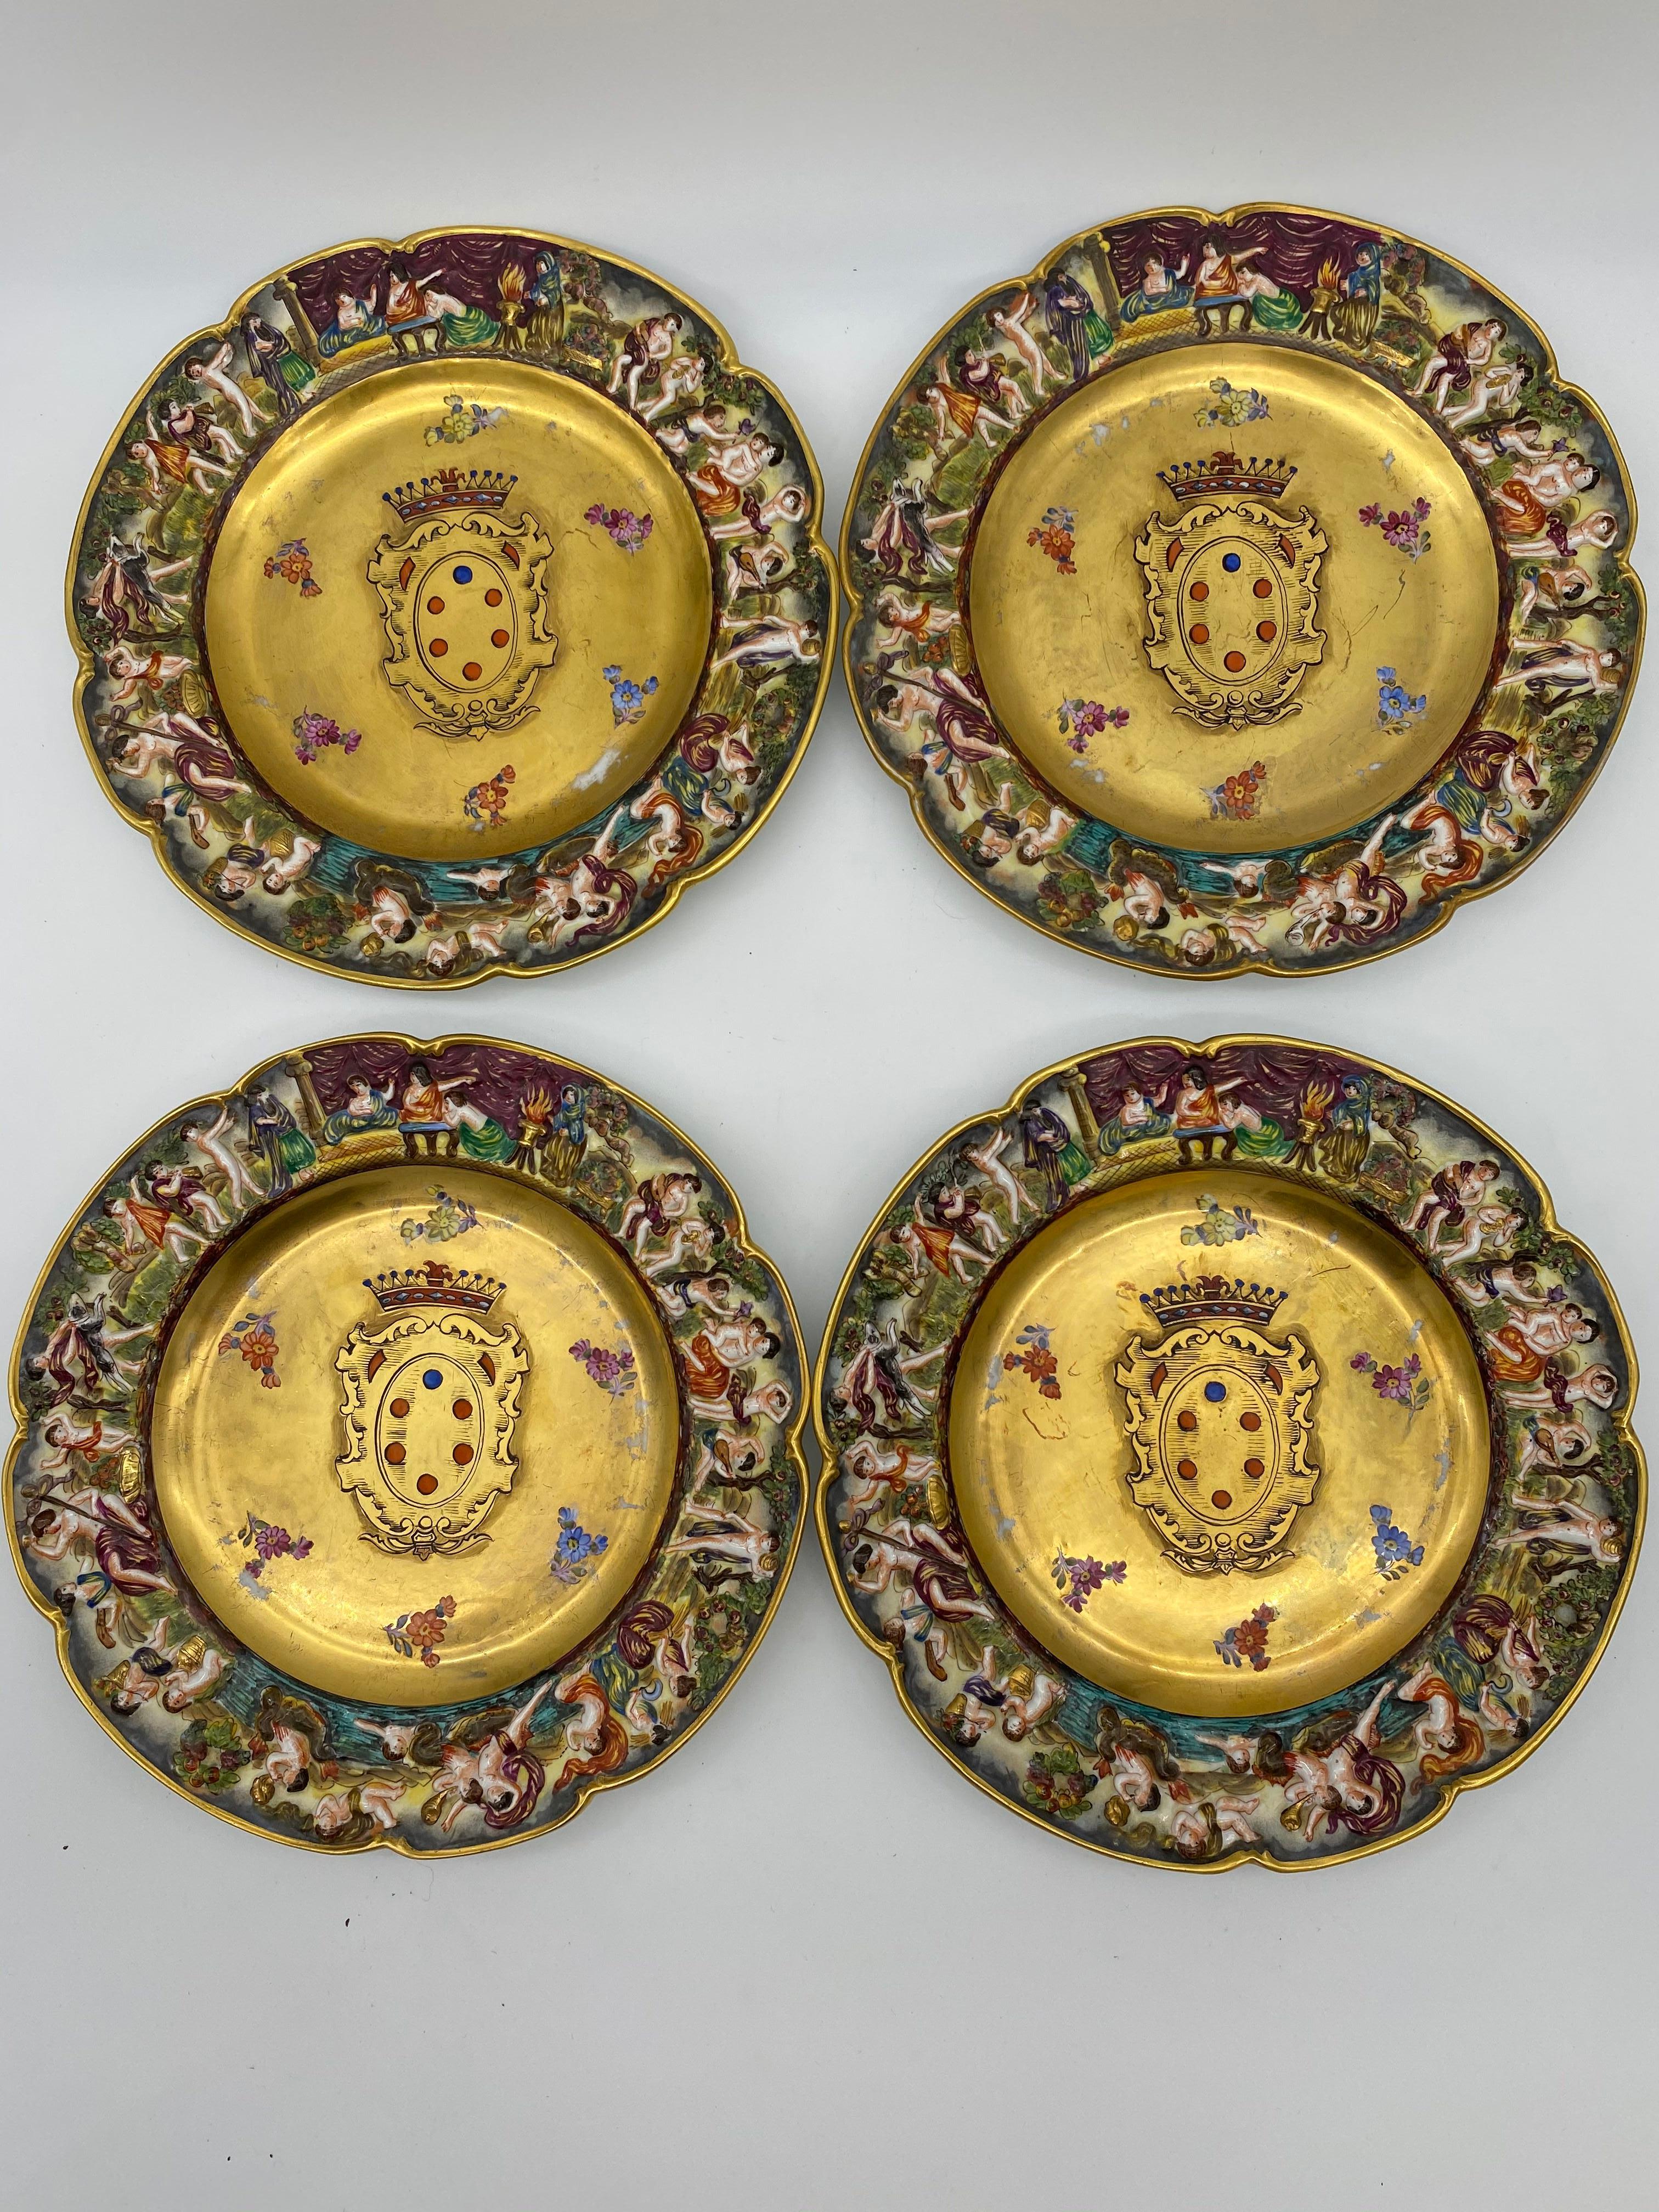 Set of 4 of 19th century Italian Capodimonte gilded porcelain relief-edge plates, each painted with the Medici family coat of arms, rims with relief molded decoration of nymphs and putti, bases stamped with blue five-point coronet and N mark within